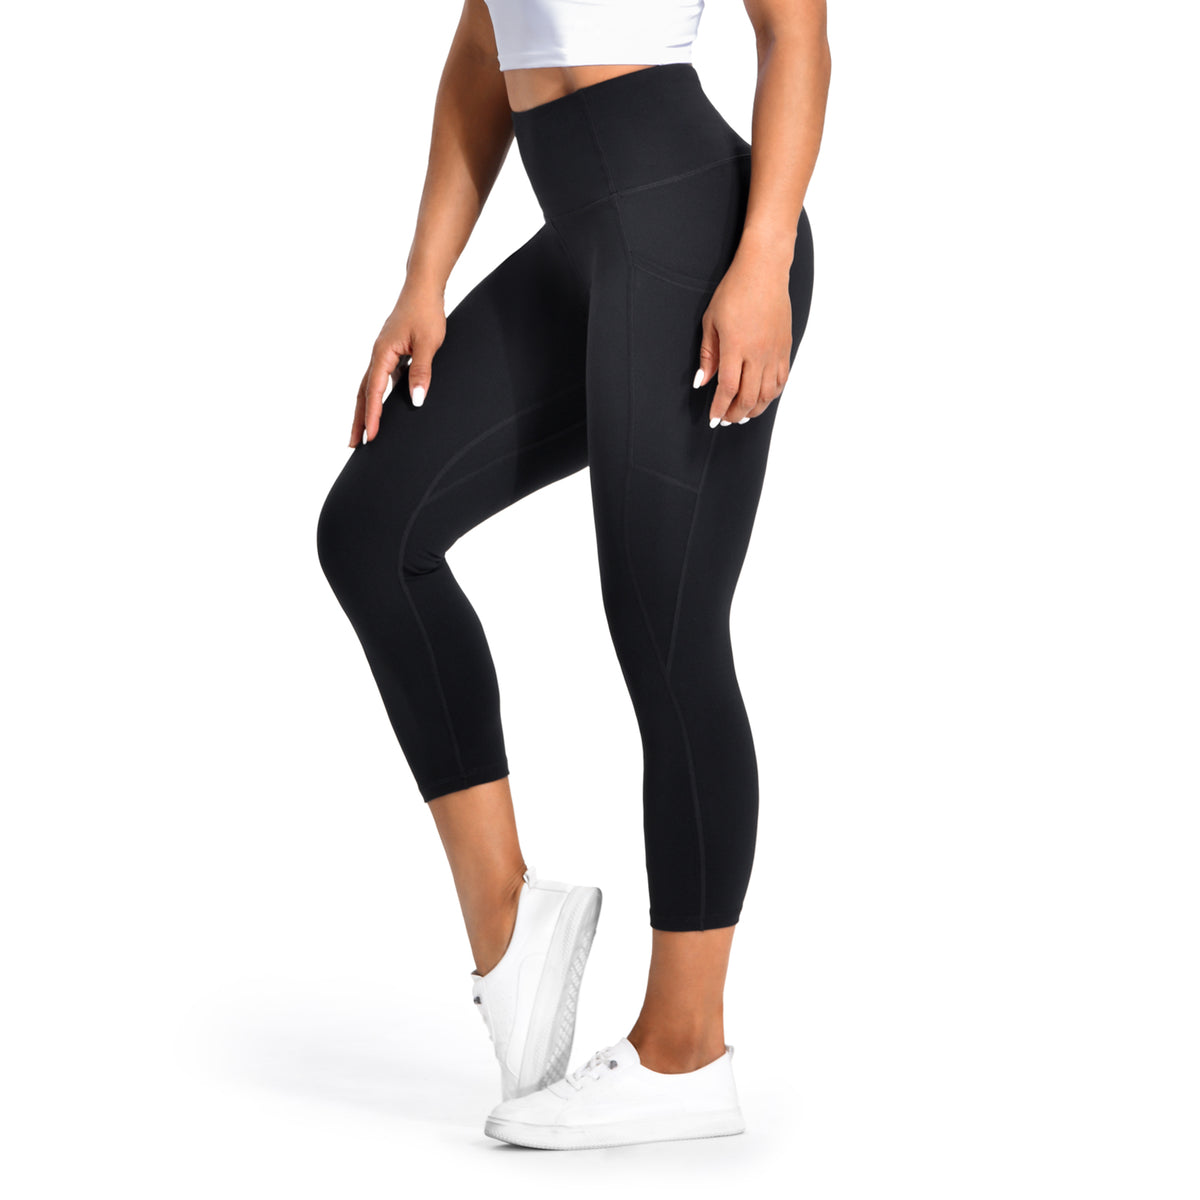 WOMEN'S HIGH WAIST LEGGINGS WITH POCKET IS3 - CABRALLY